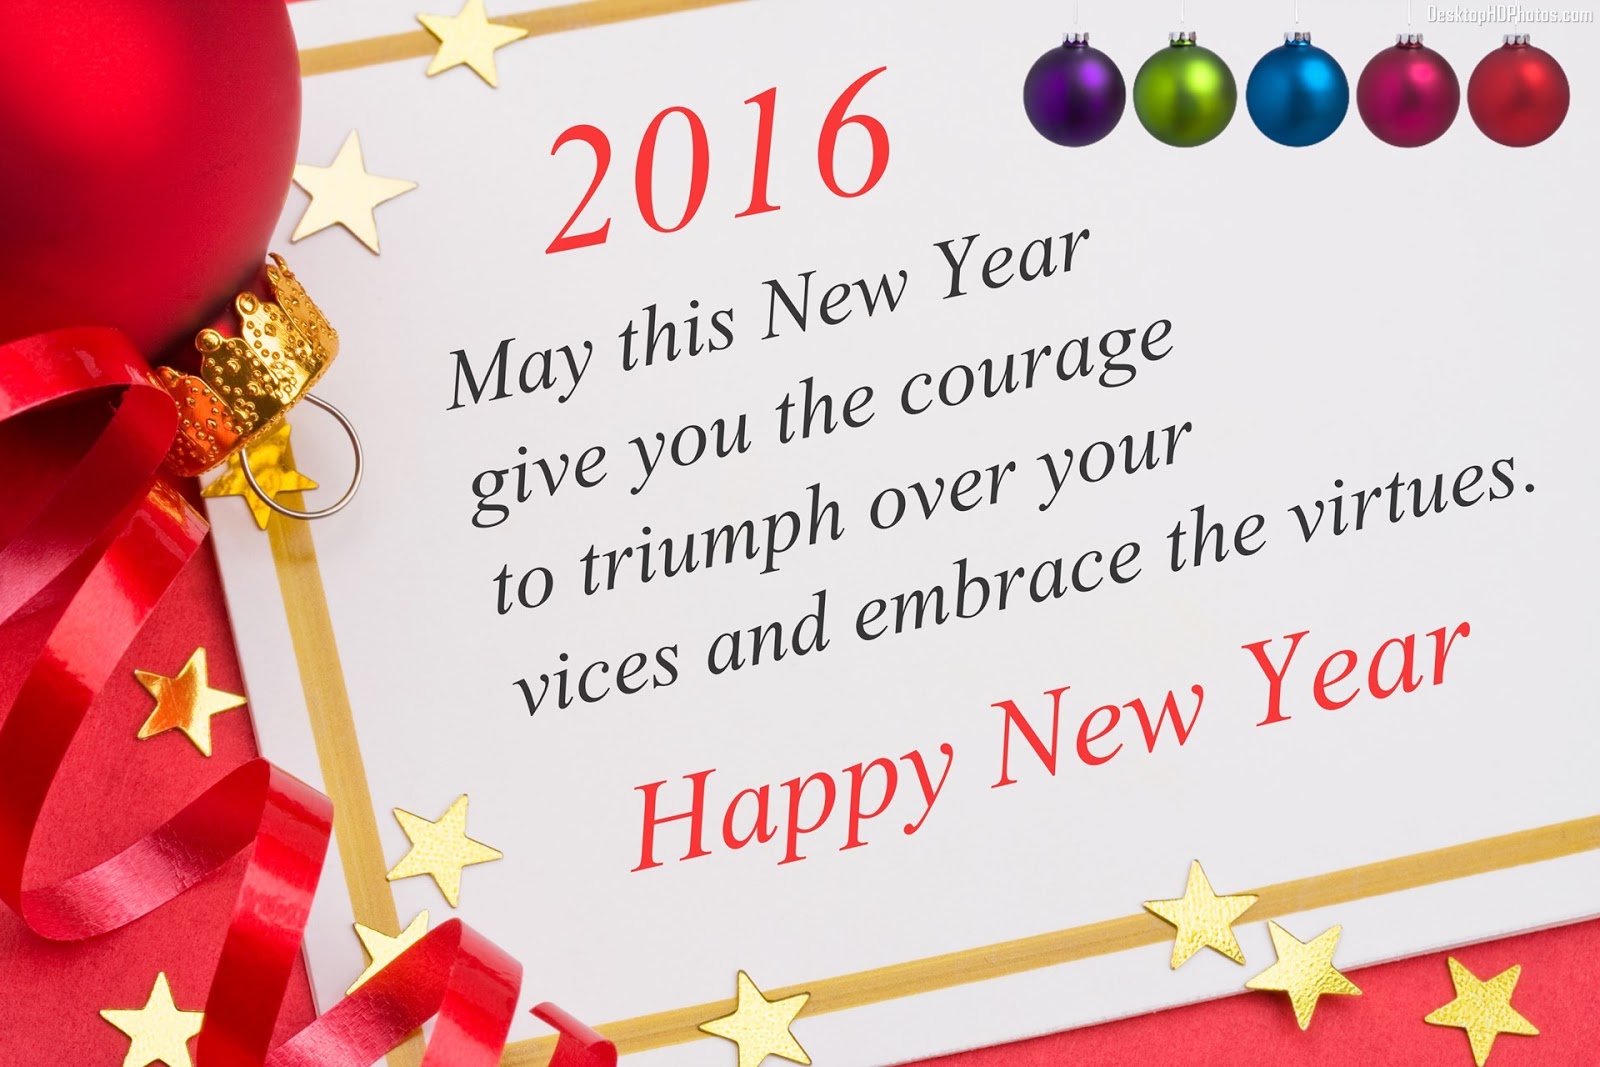 Happy New Year Quotes 2016 In English